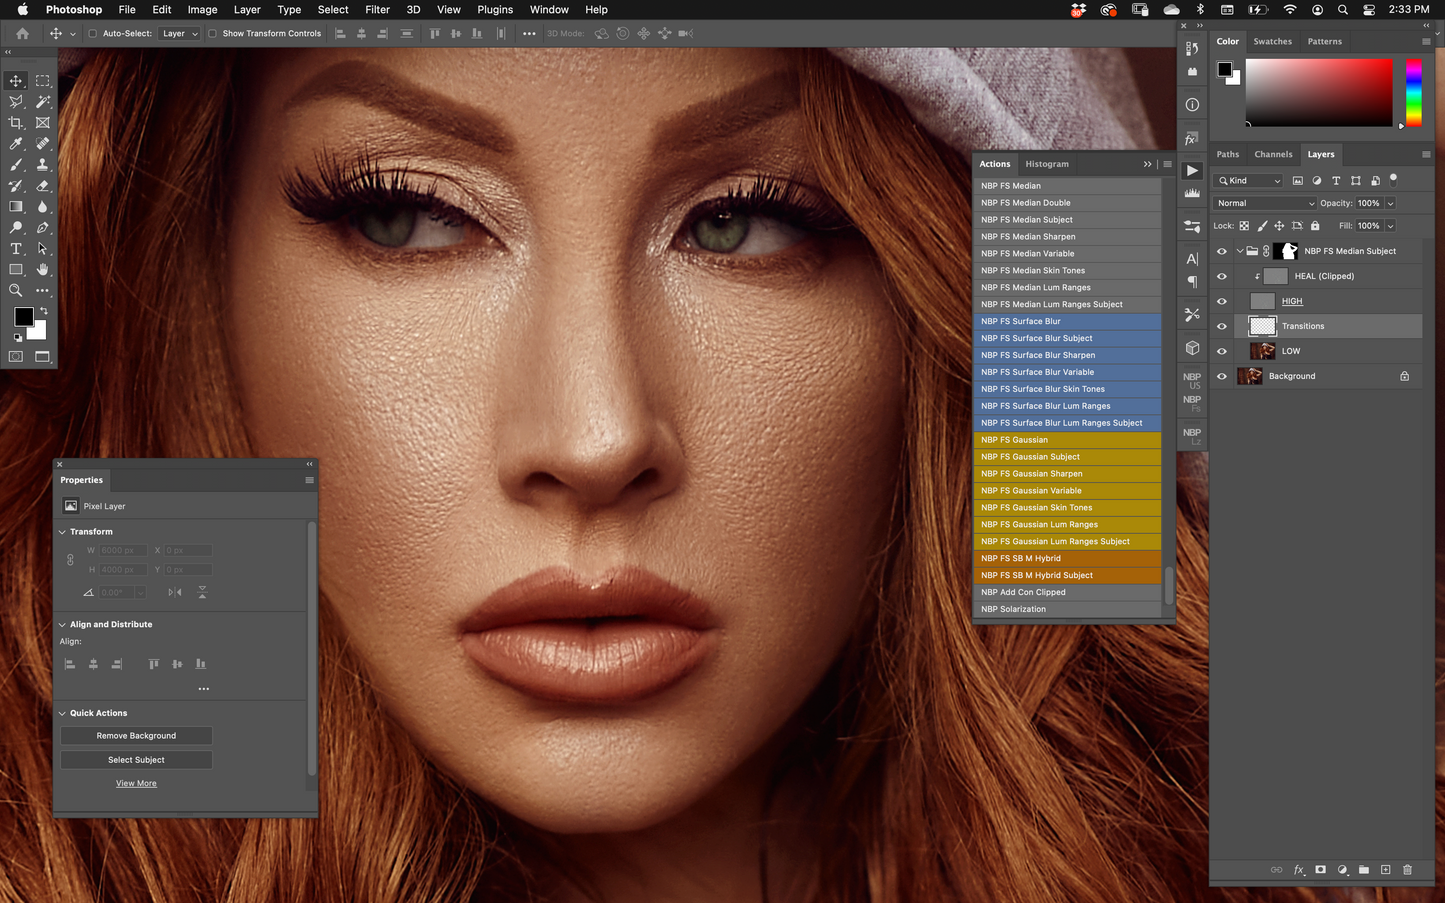 NBP Actions 9: Frequency Separation Tools for Photoshop